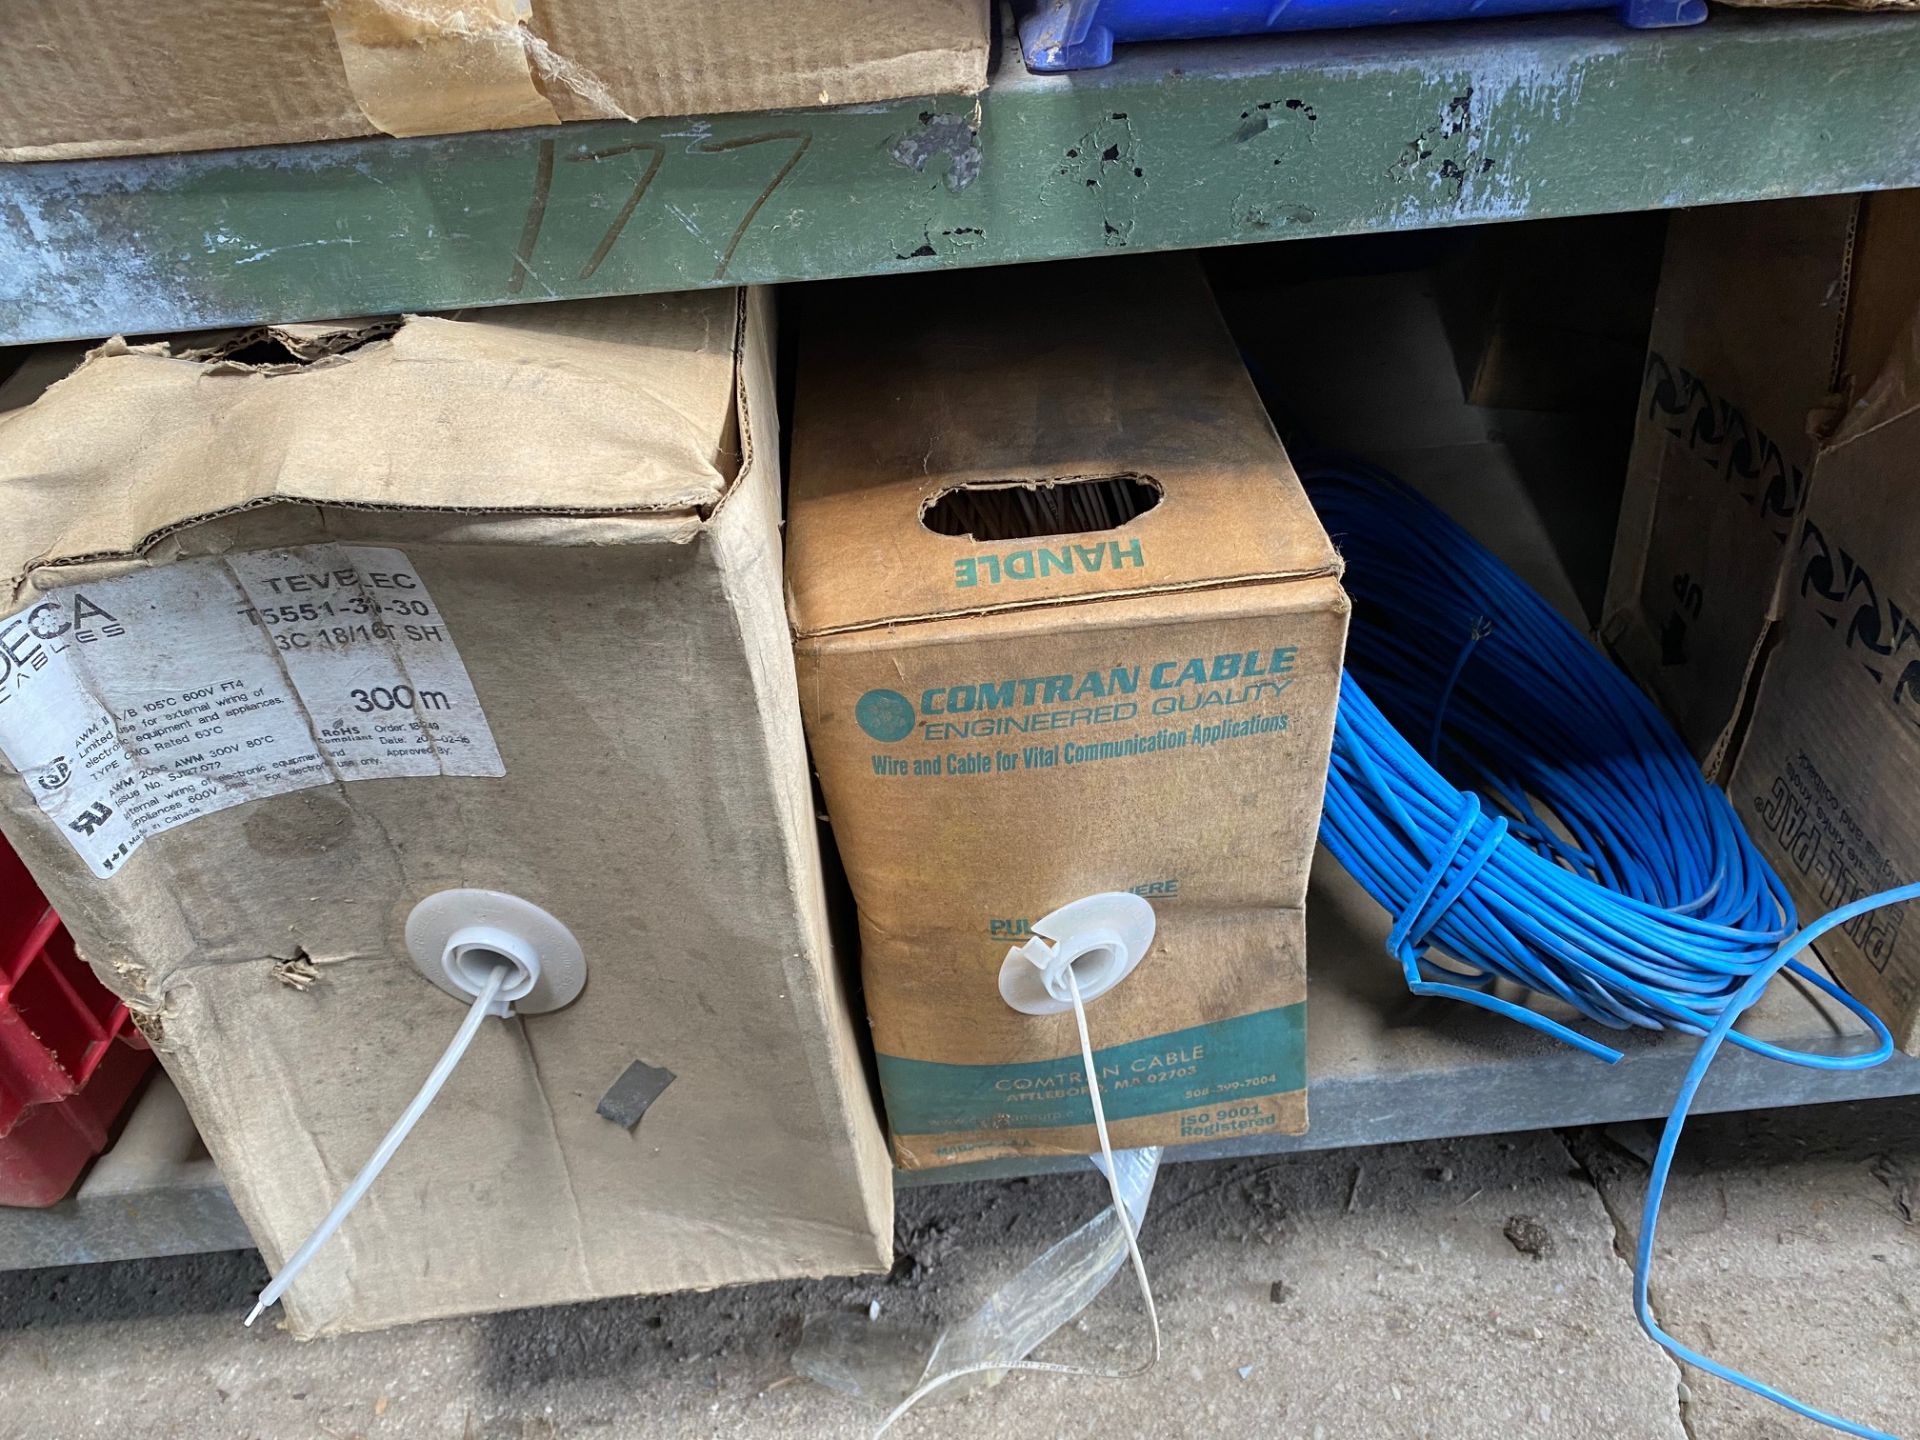 LOT CONSISTING OF COMMUNICATION WIRES, WATER PUMPS, DISTRIBUTORS, DIN CONNECTORS, TOOL BALANCER - Image 9 of 13